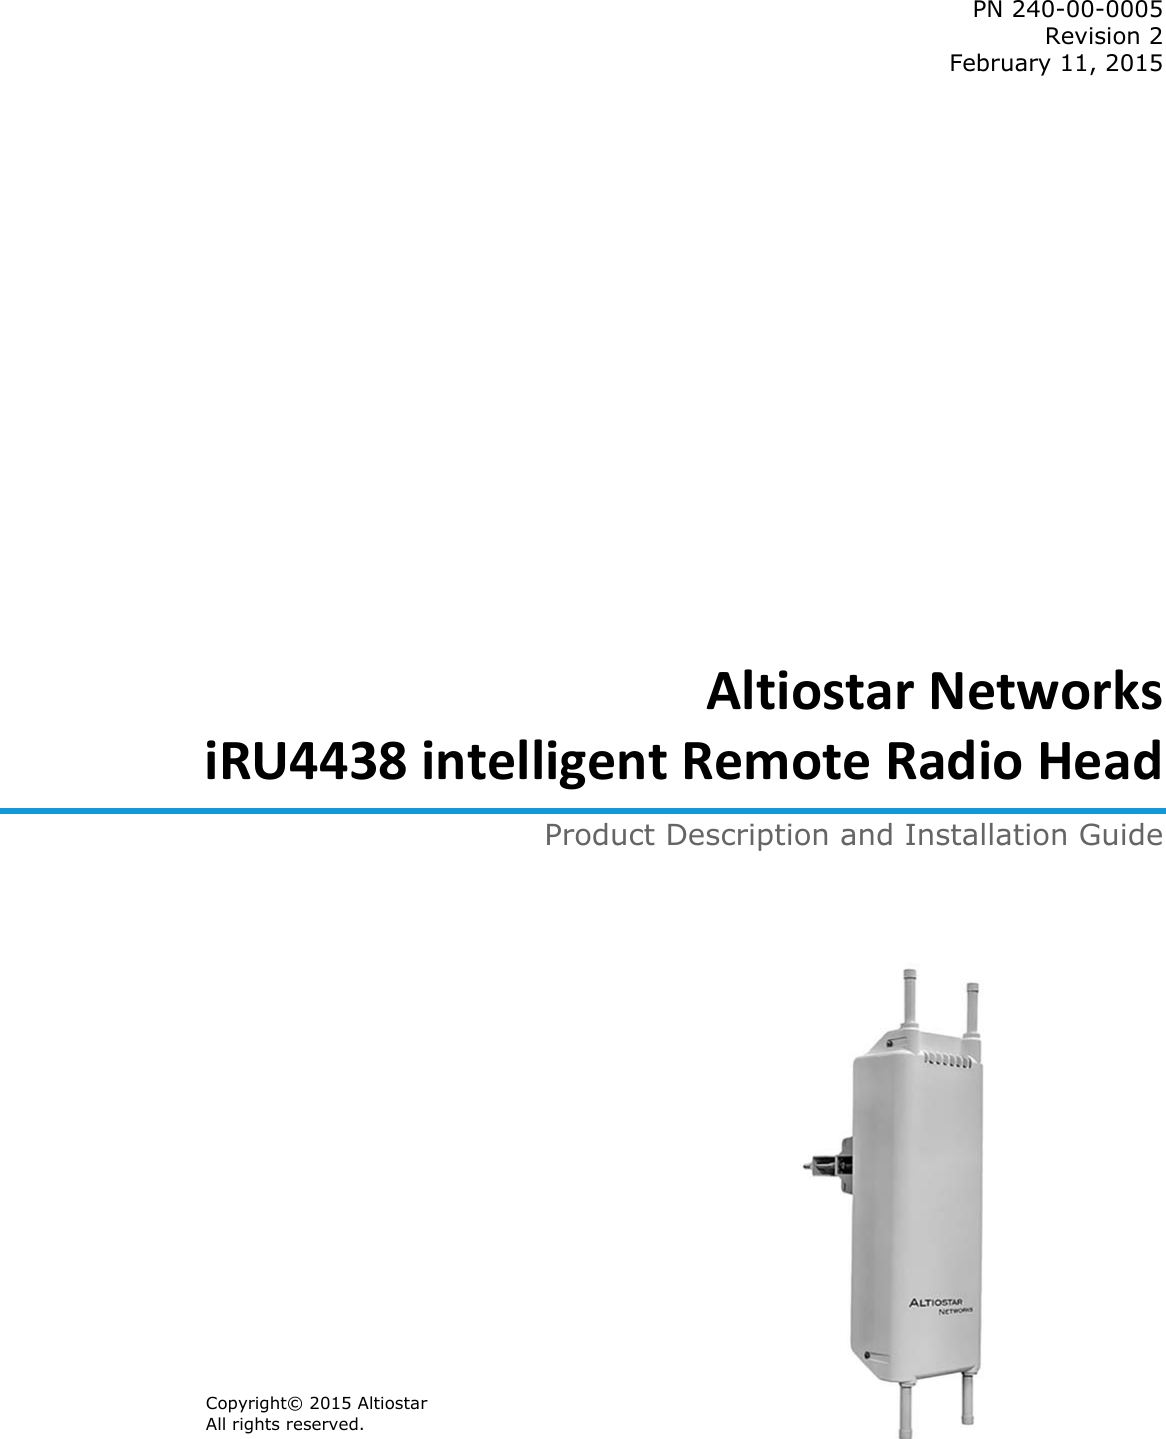 PN 240-00-0005Revision 2 February 11, 2015AltiostarNetworksiRU4438intelligentRemoteRadioHeadProduct Description and Installation GuideCopyright© 2015 AltiostarAll rights reserved.